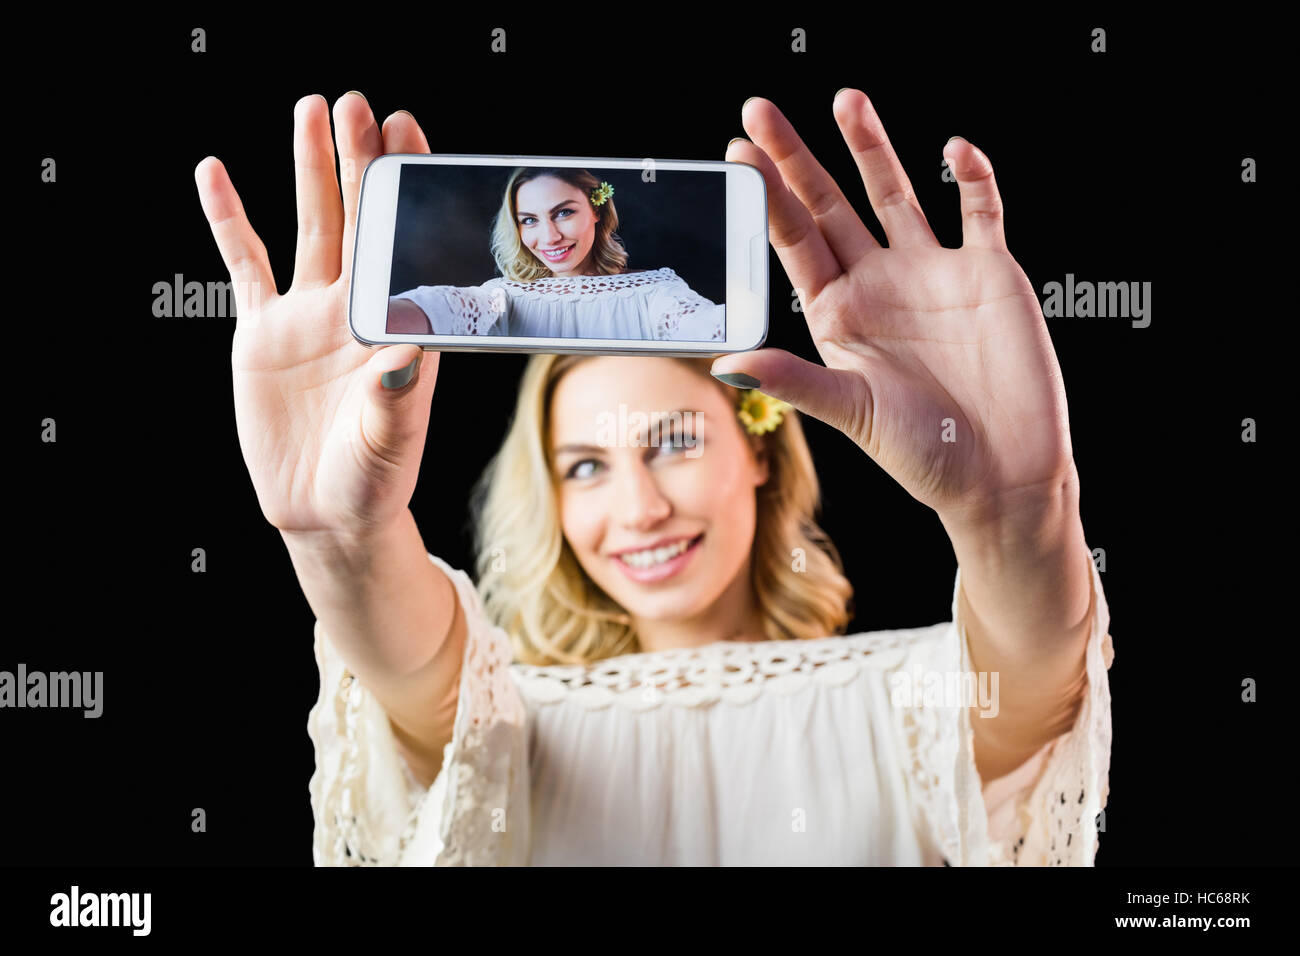 Smiling woman clicking photo from mobile phone against black background Stock Photo